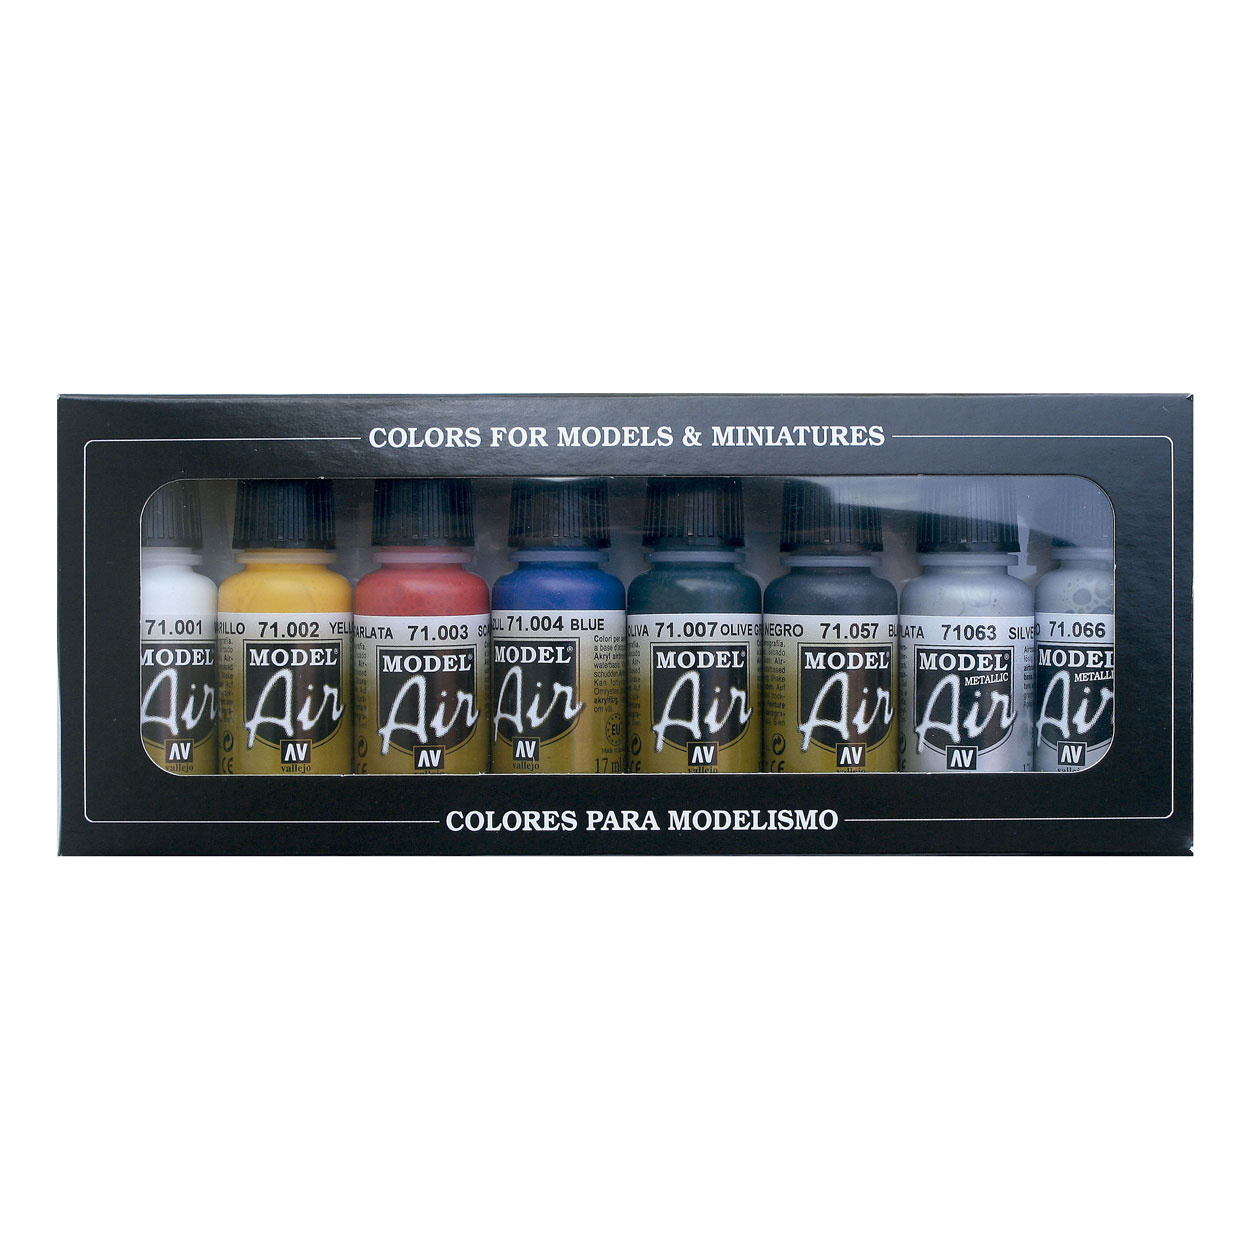 Vallejo Paint Sets - Scenery Workshop BV - Everything you need for Scenery  and Model Building!